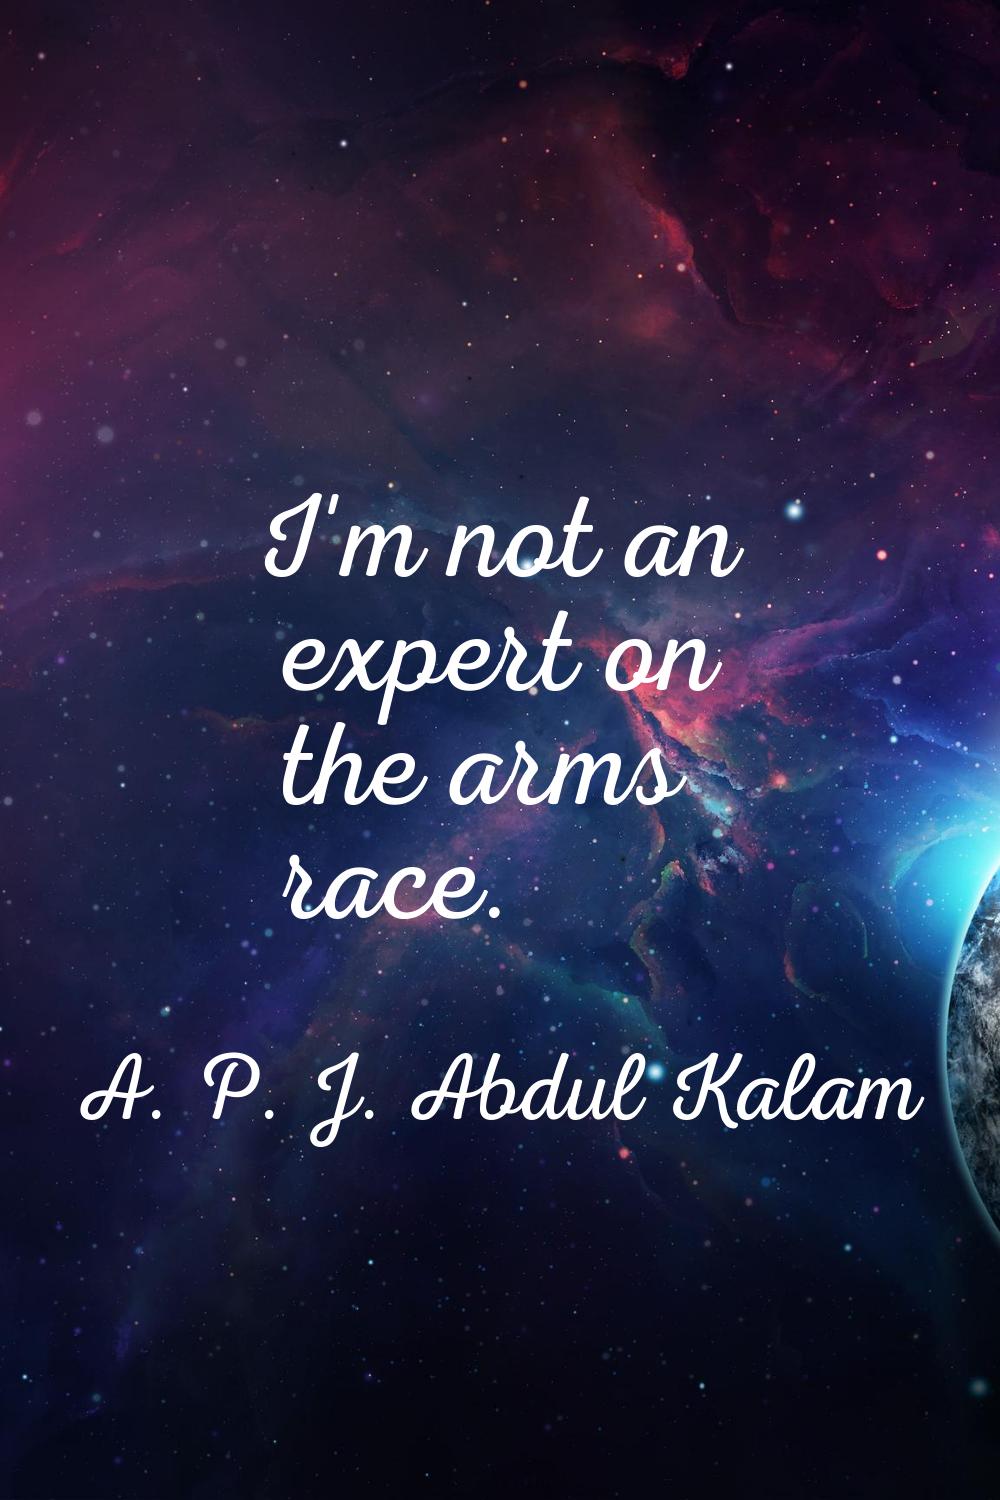 I'm not an expert on the arms race.